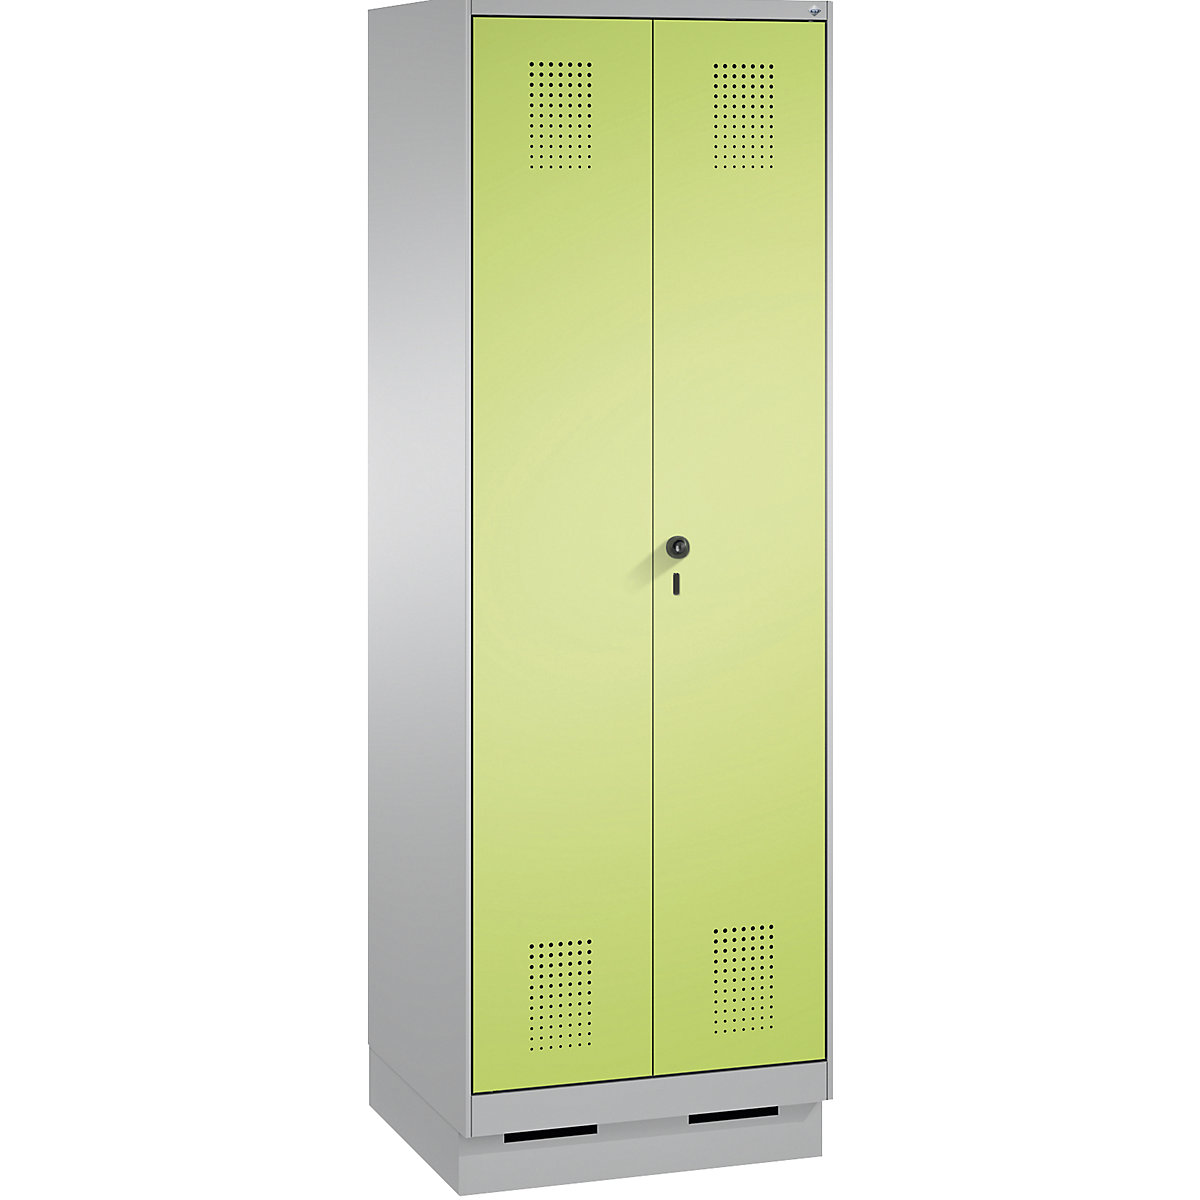 EVOLO cloakroom locker, doors close in the middle – C+P, 2 compartments, compartment width 300 mm, with plinth, white aluminium / viridian green-8